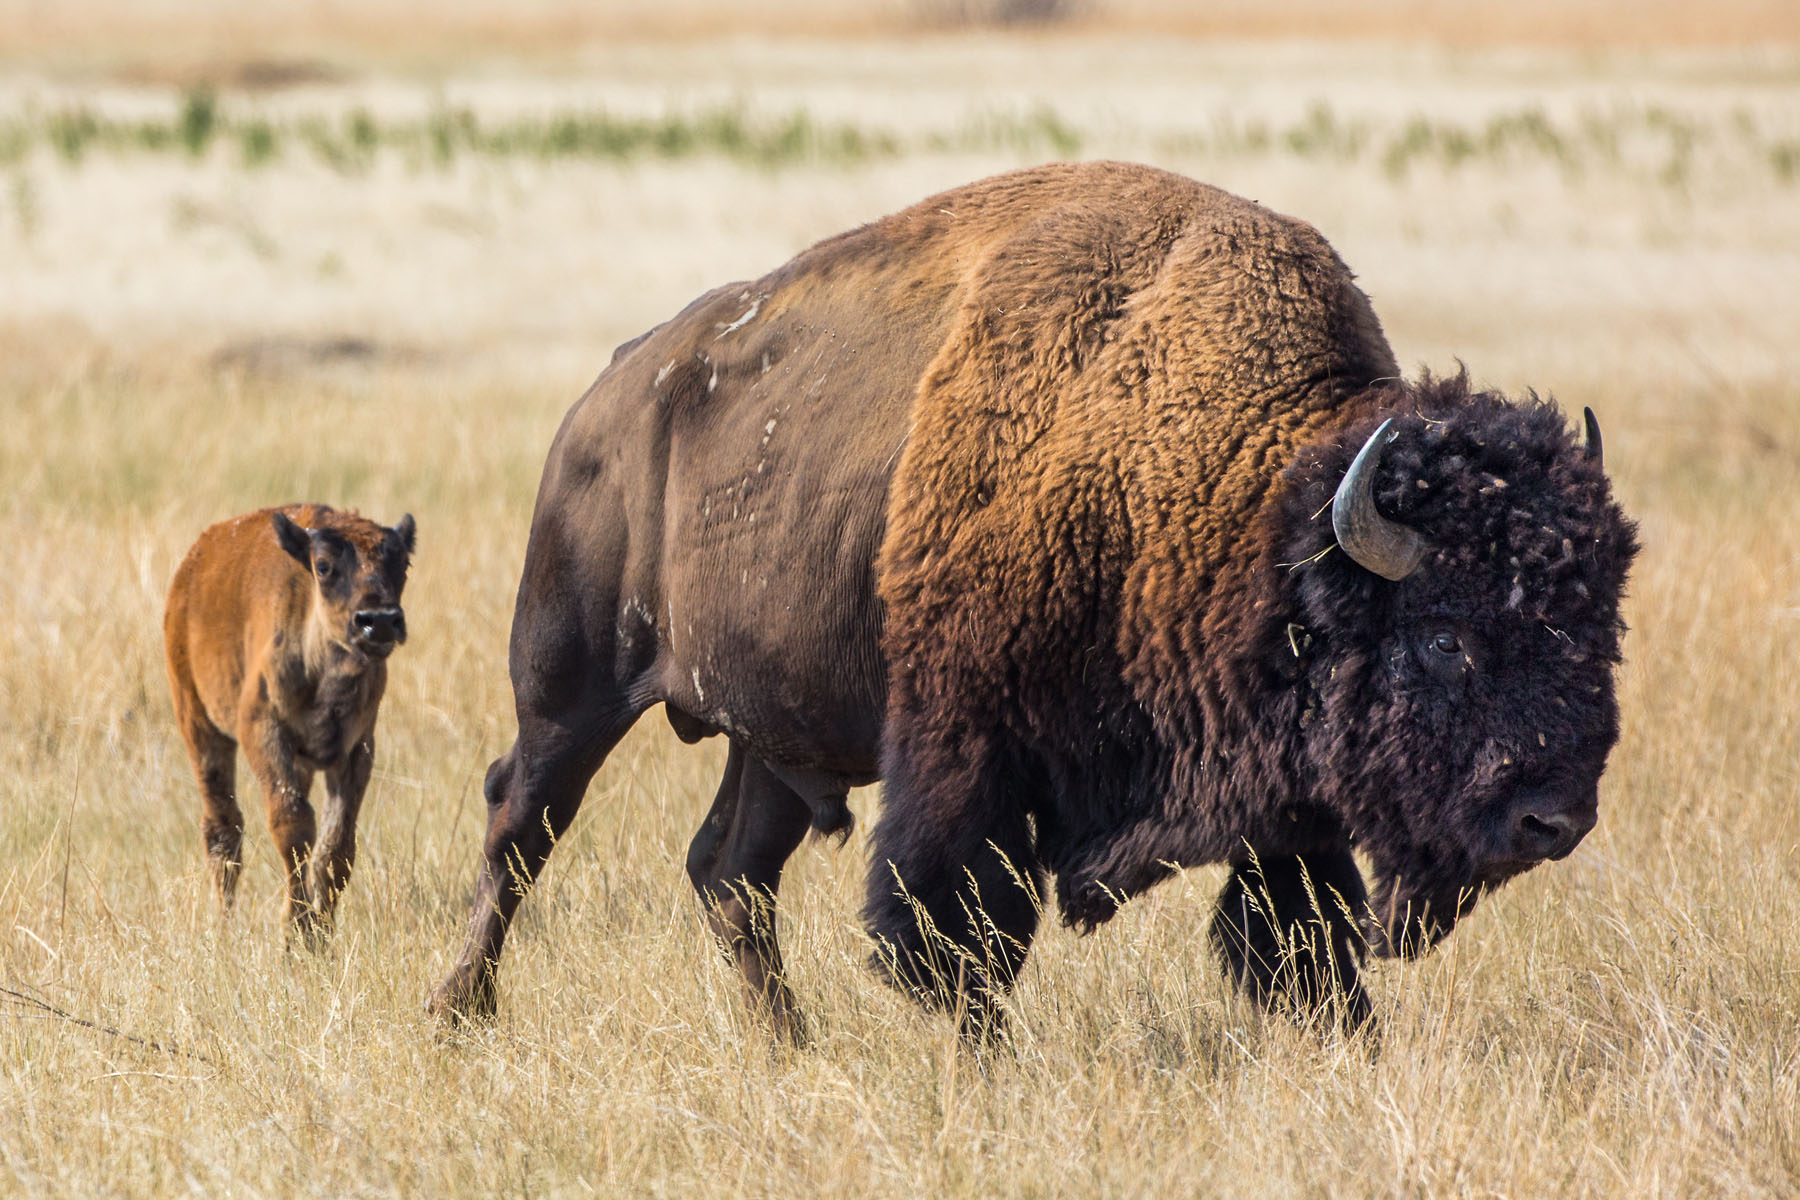 Bison jogging across the prairie near Badlands National Park, summer 2020.  Click for next photo.